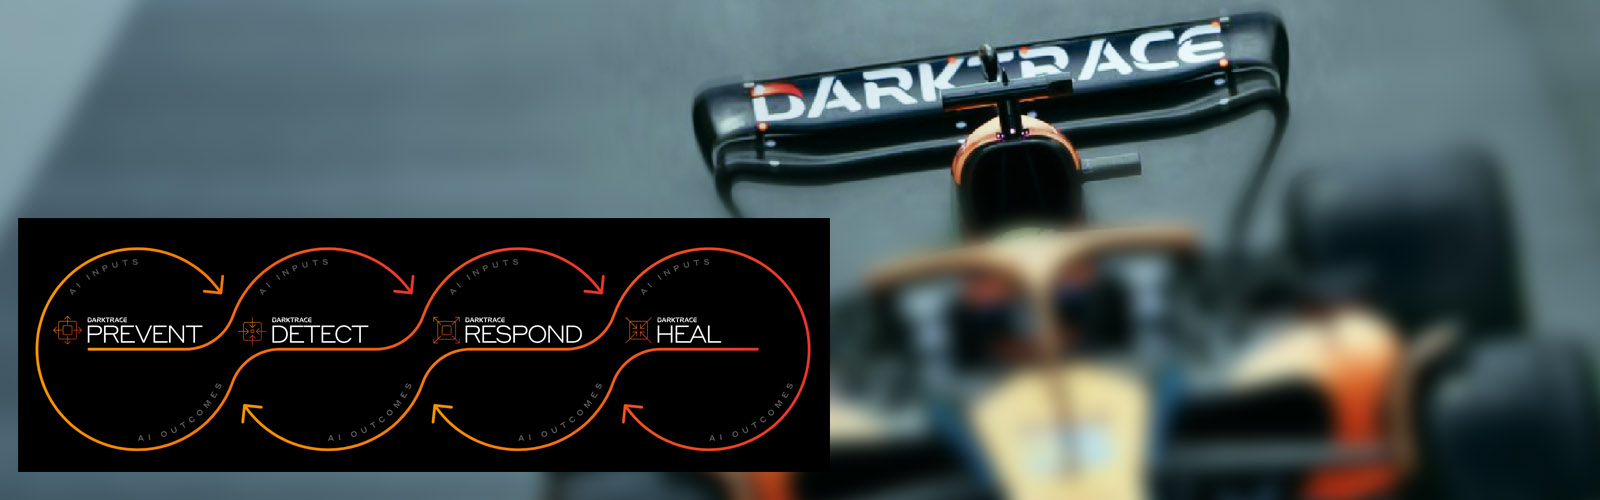 Darktrace logo on the back of a McLaren F1 Car Wing